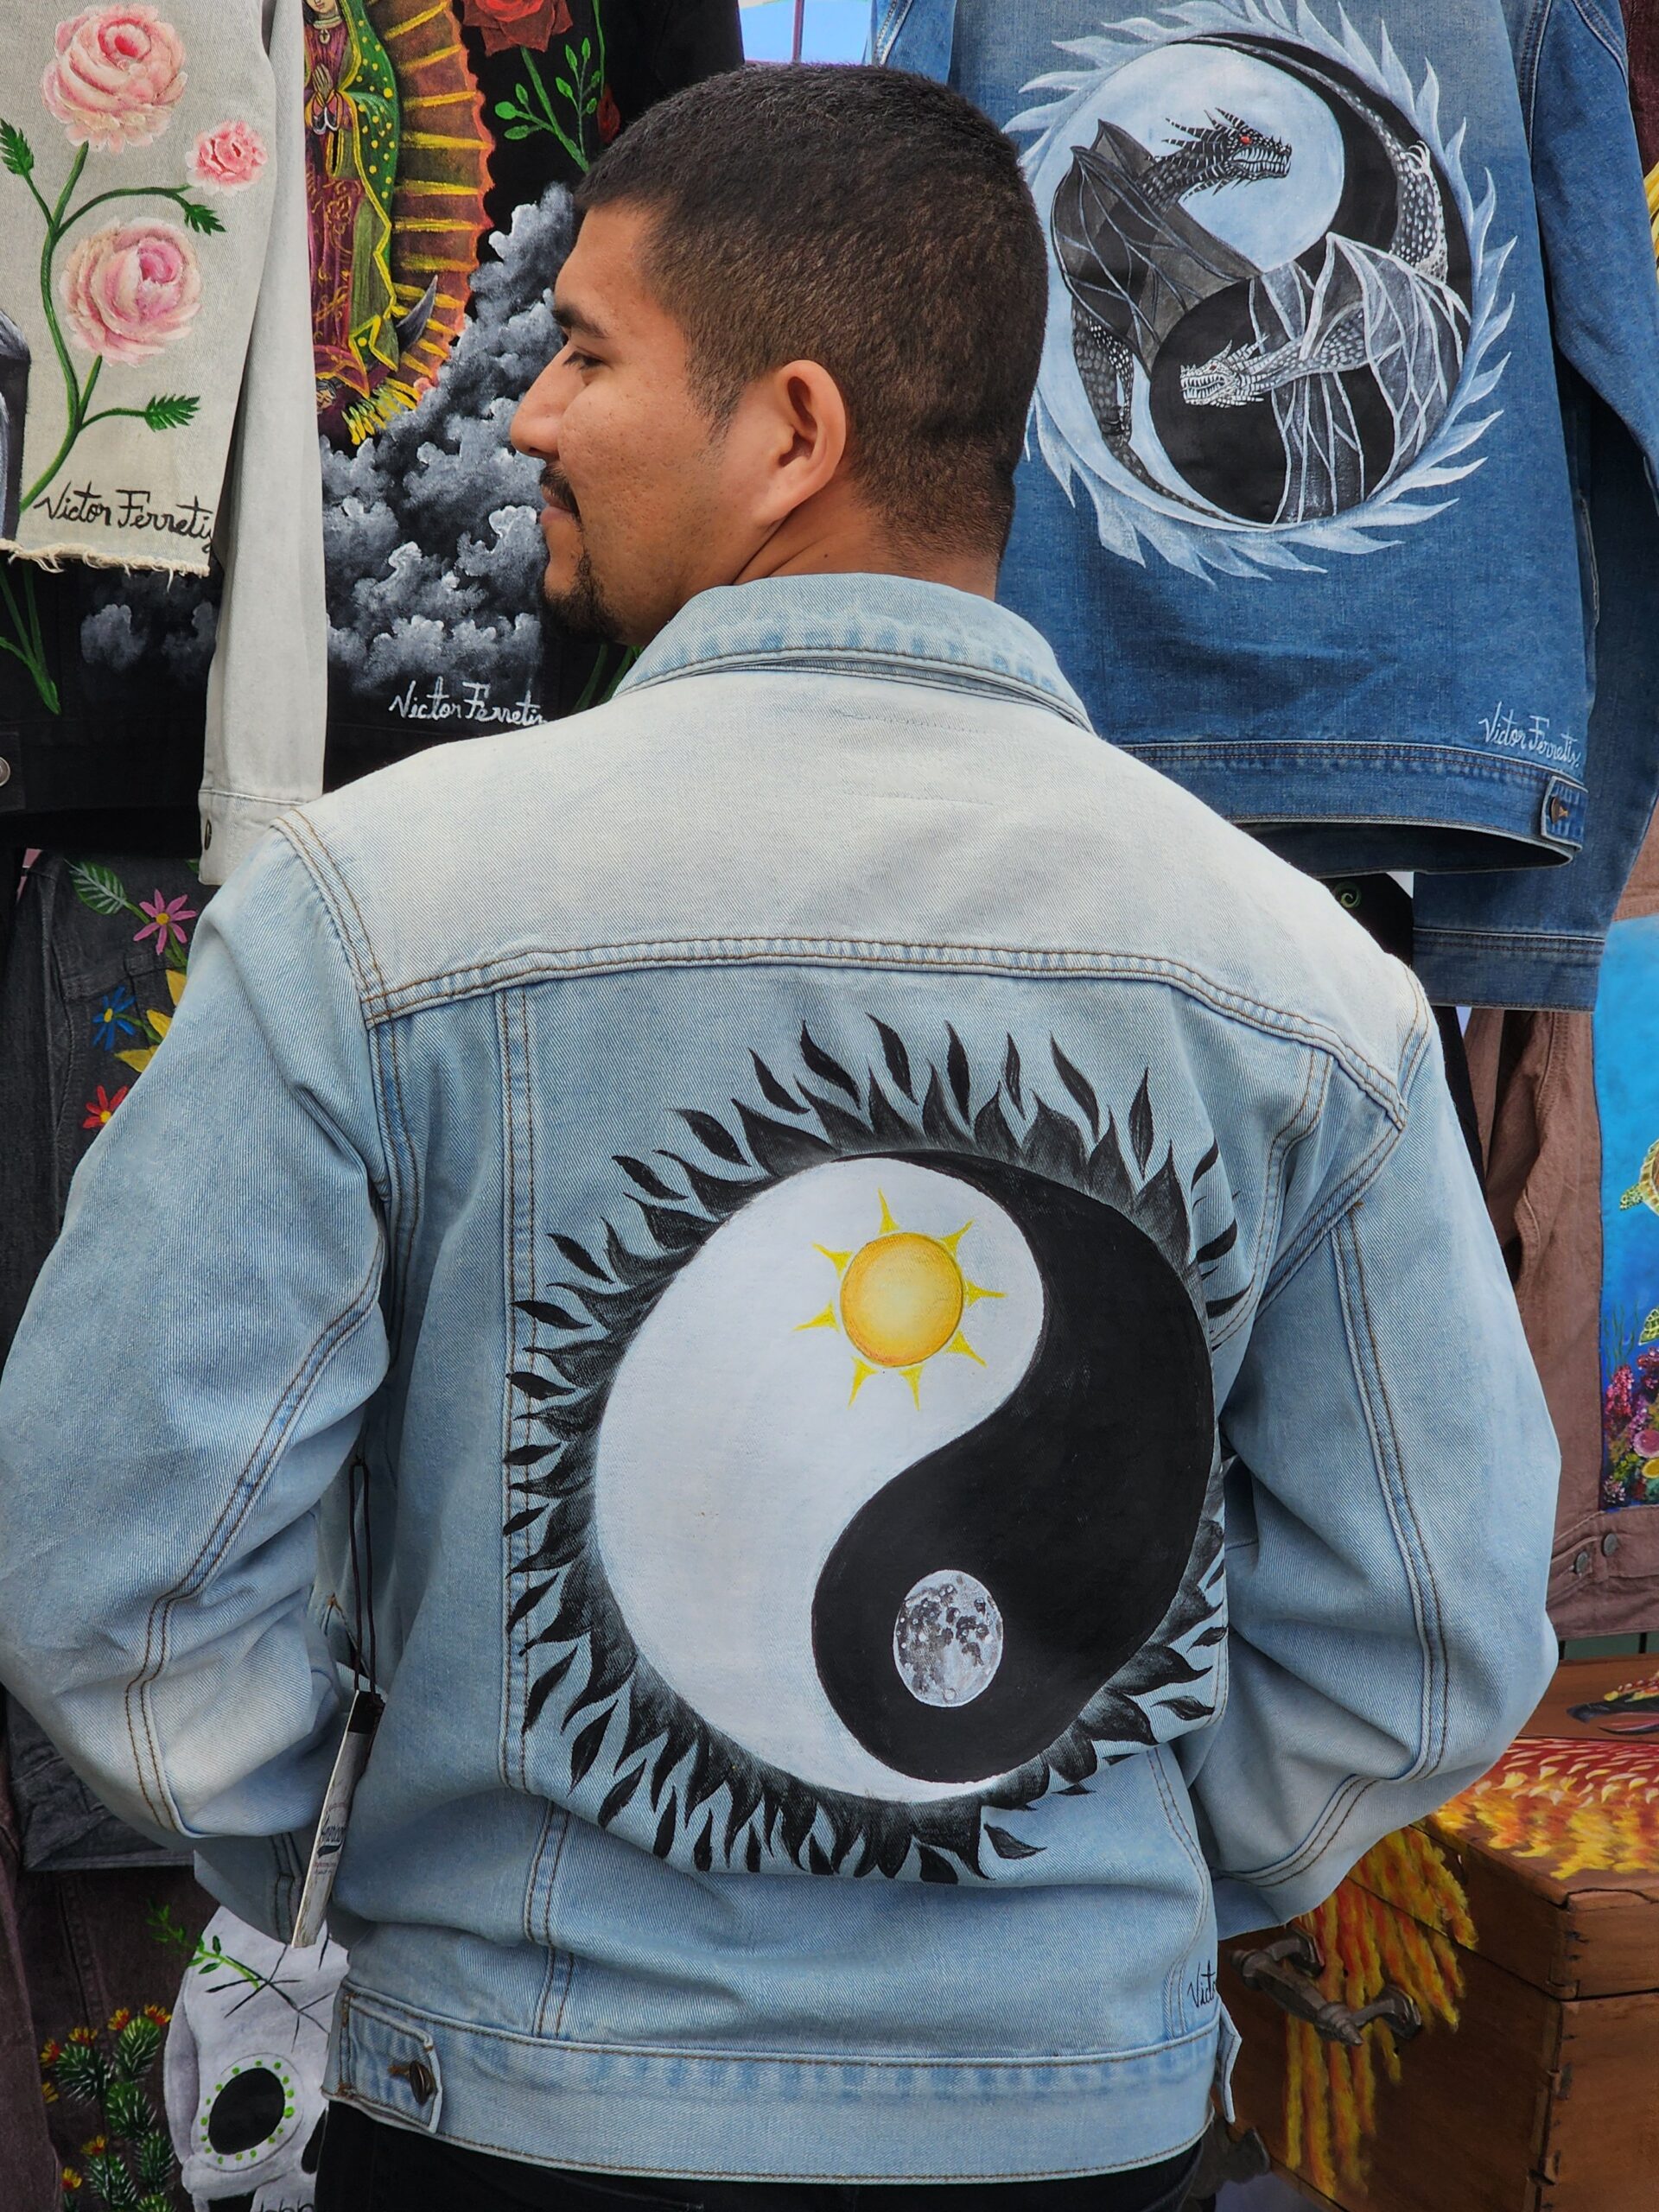 Handpainted brand new jacket. This jacket is heat pressed so you can wash it and dry it. Size: M (men’s)